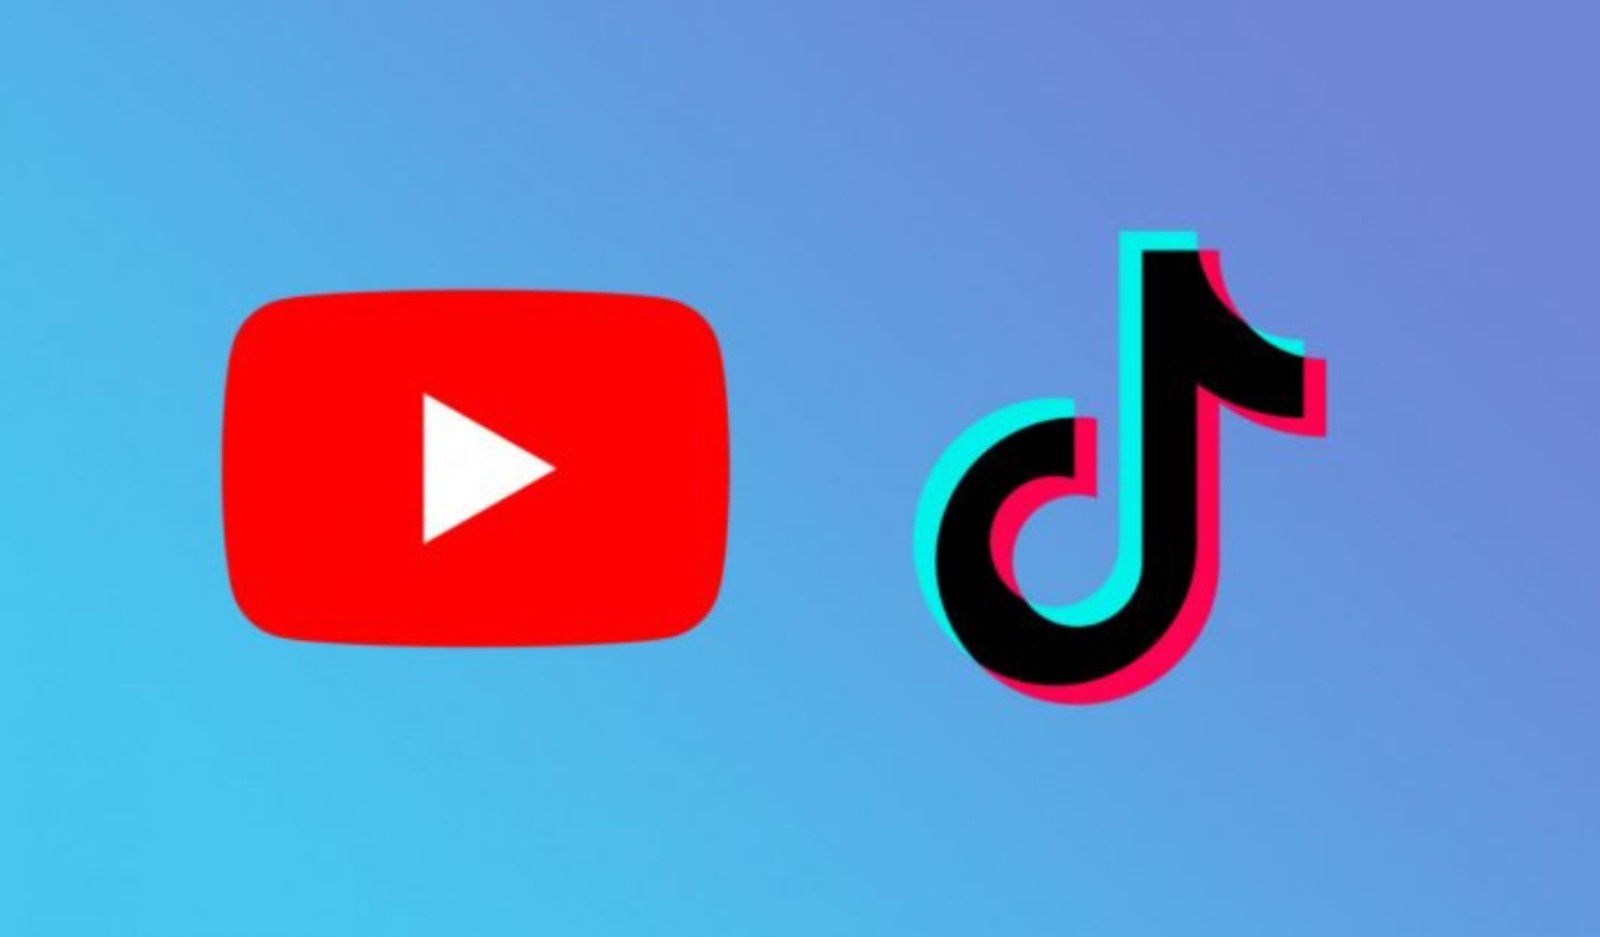 YouTube Shorts: Will it be Able to Capture Tik Tok’s Audience?